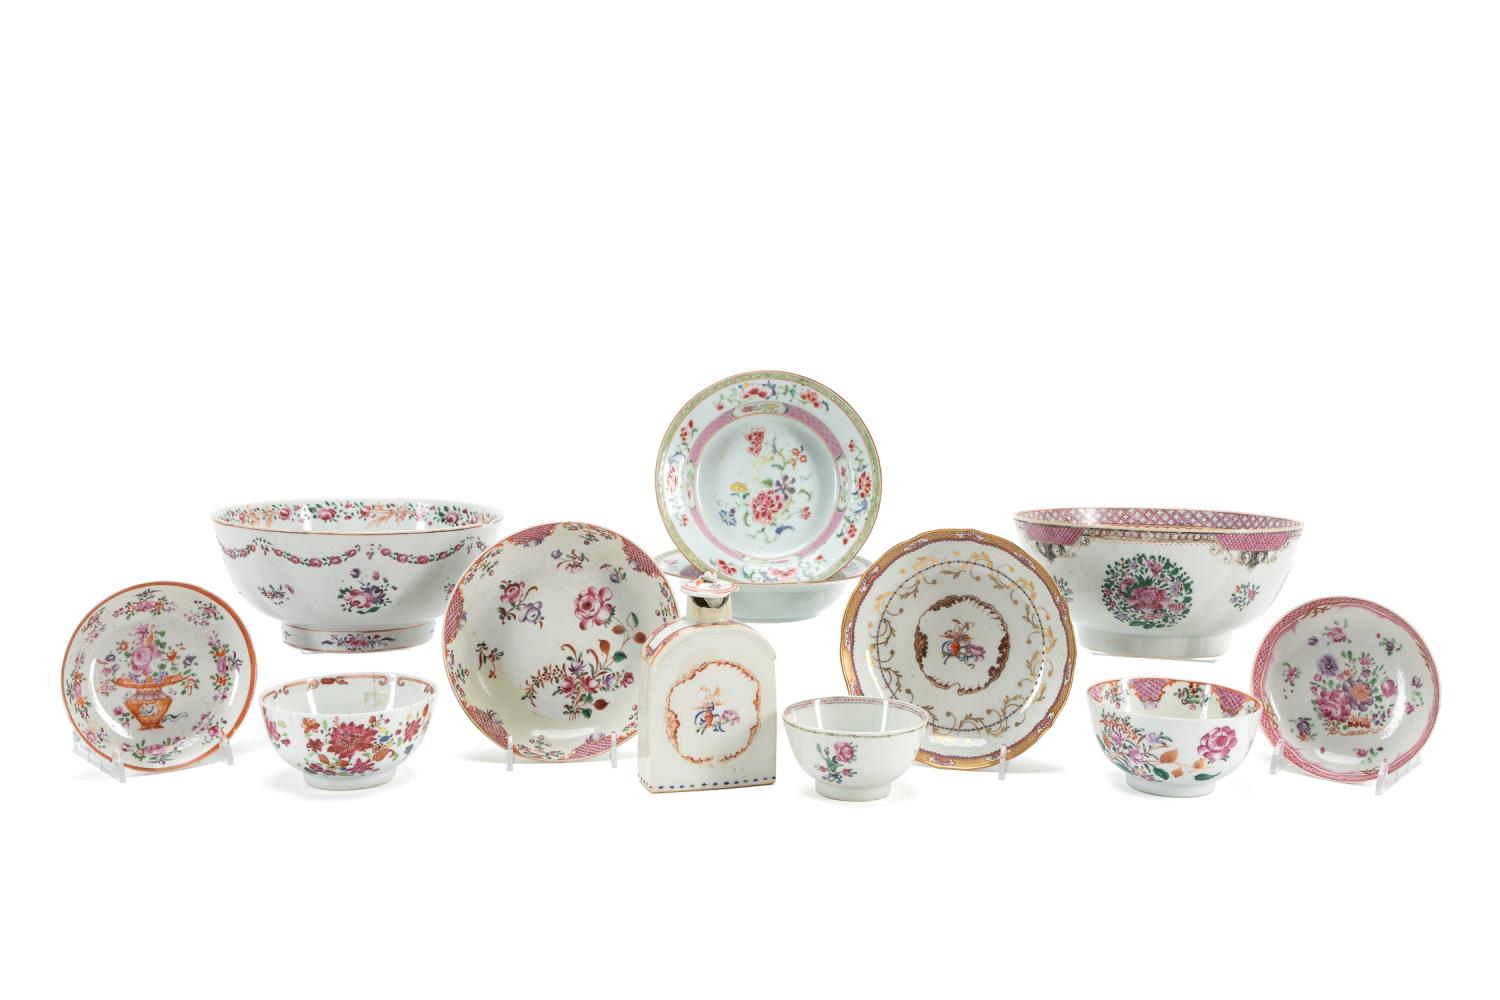 12PCS CHINESE FAMILLE ROSE EXPORT 358d3d